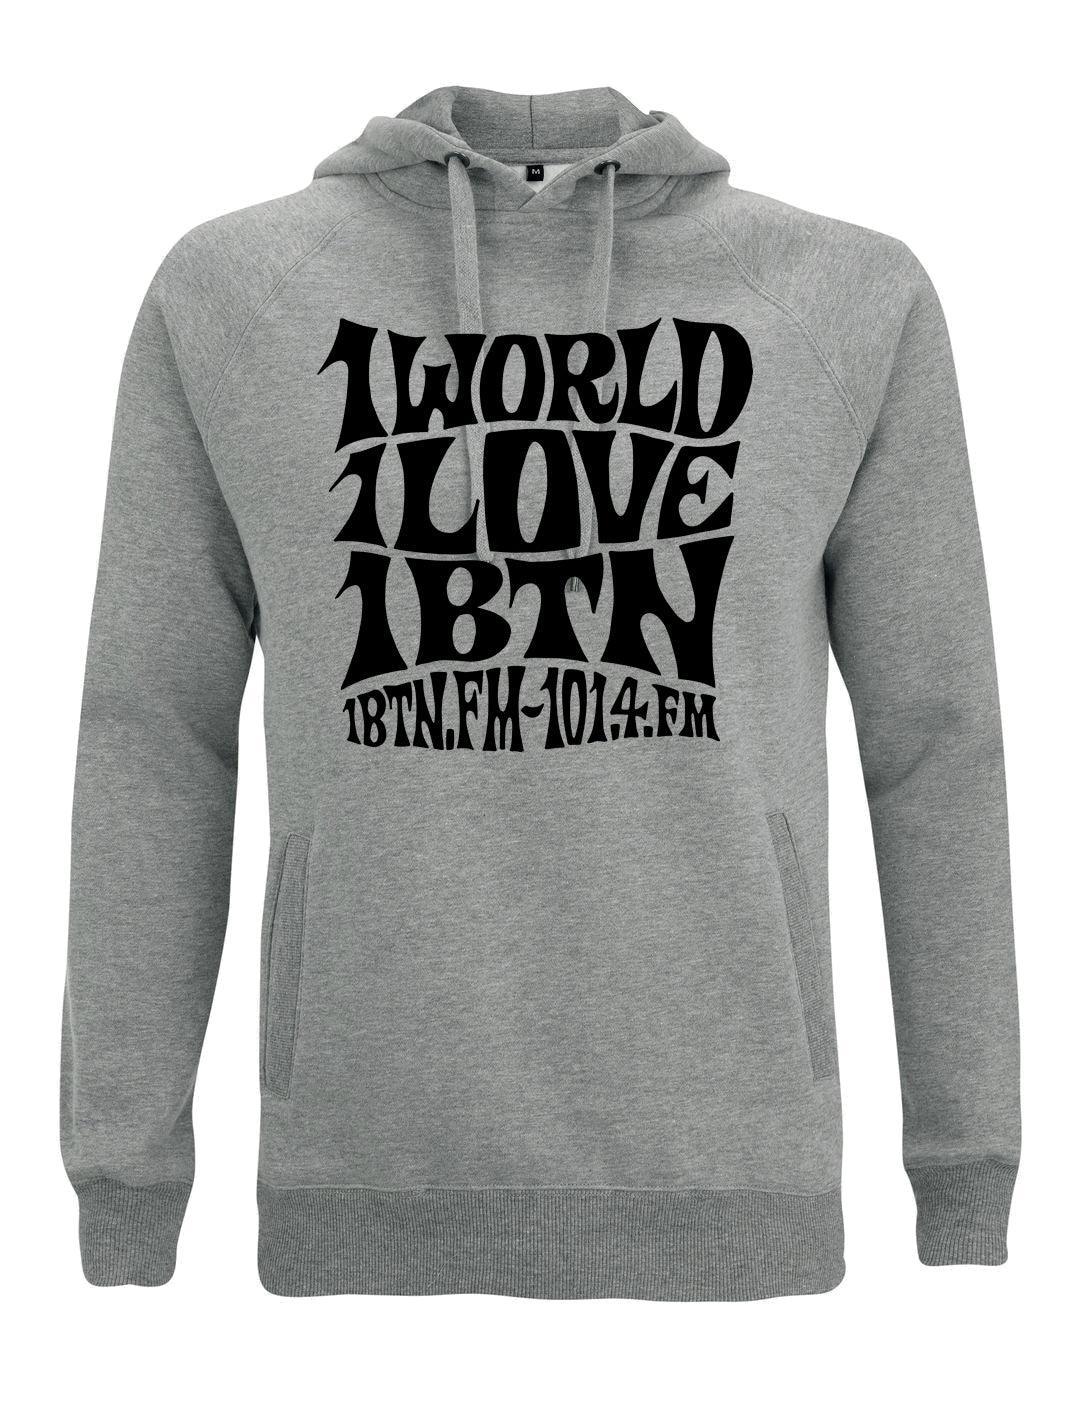 1 WORLD 1 LOVE by Swifty: Hoodie Official Merchandise of 1BTN.FM (5 Colour Options) - SOUND IS COLOUR